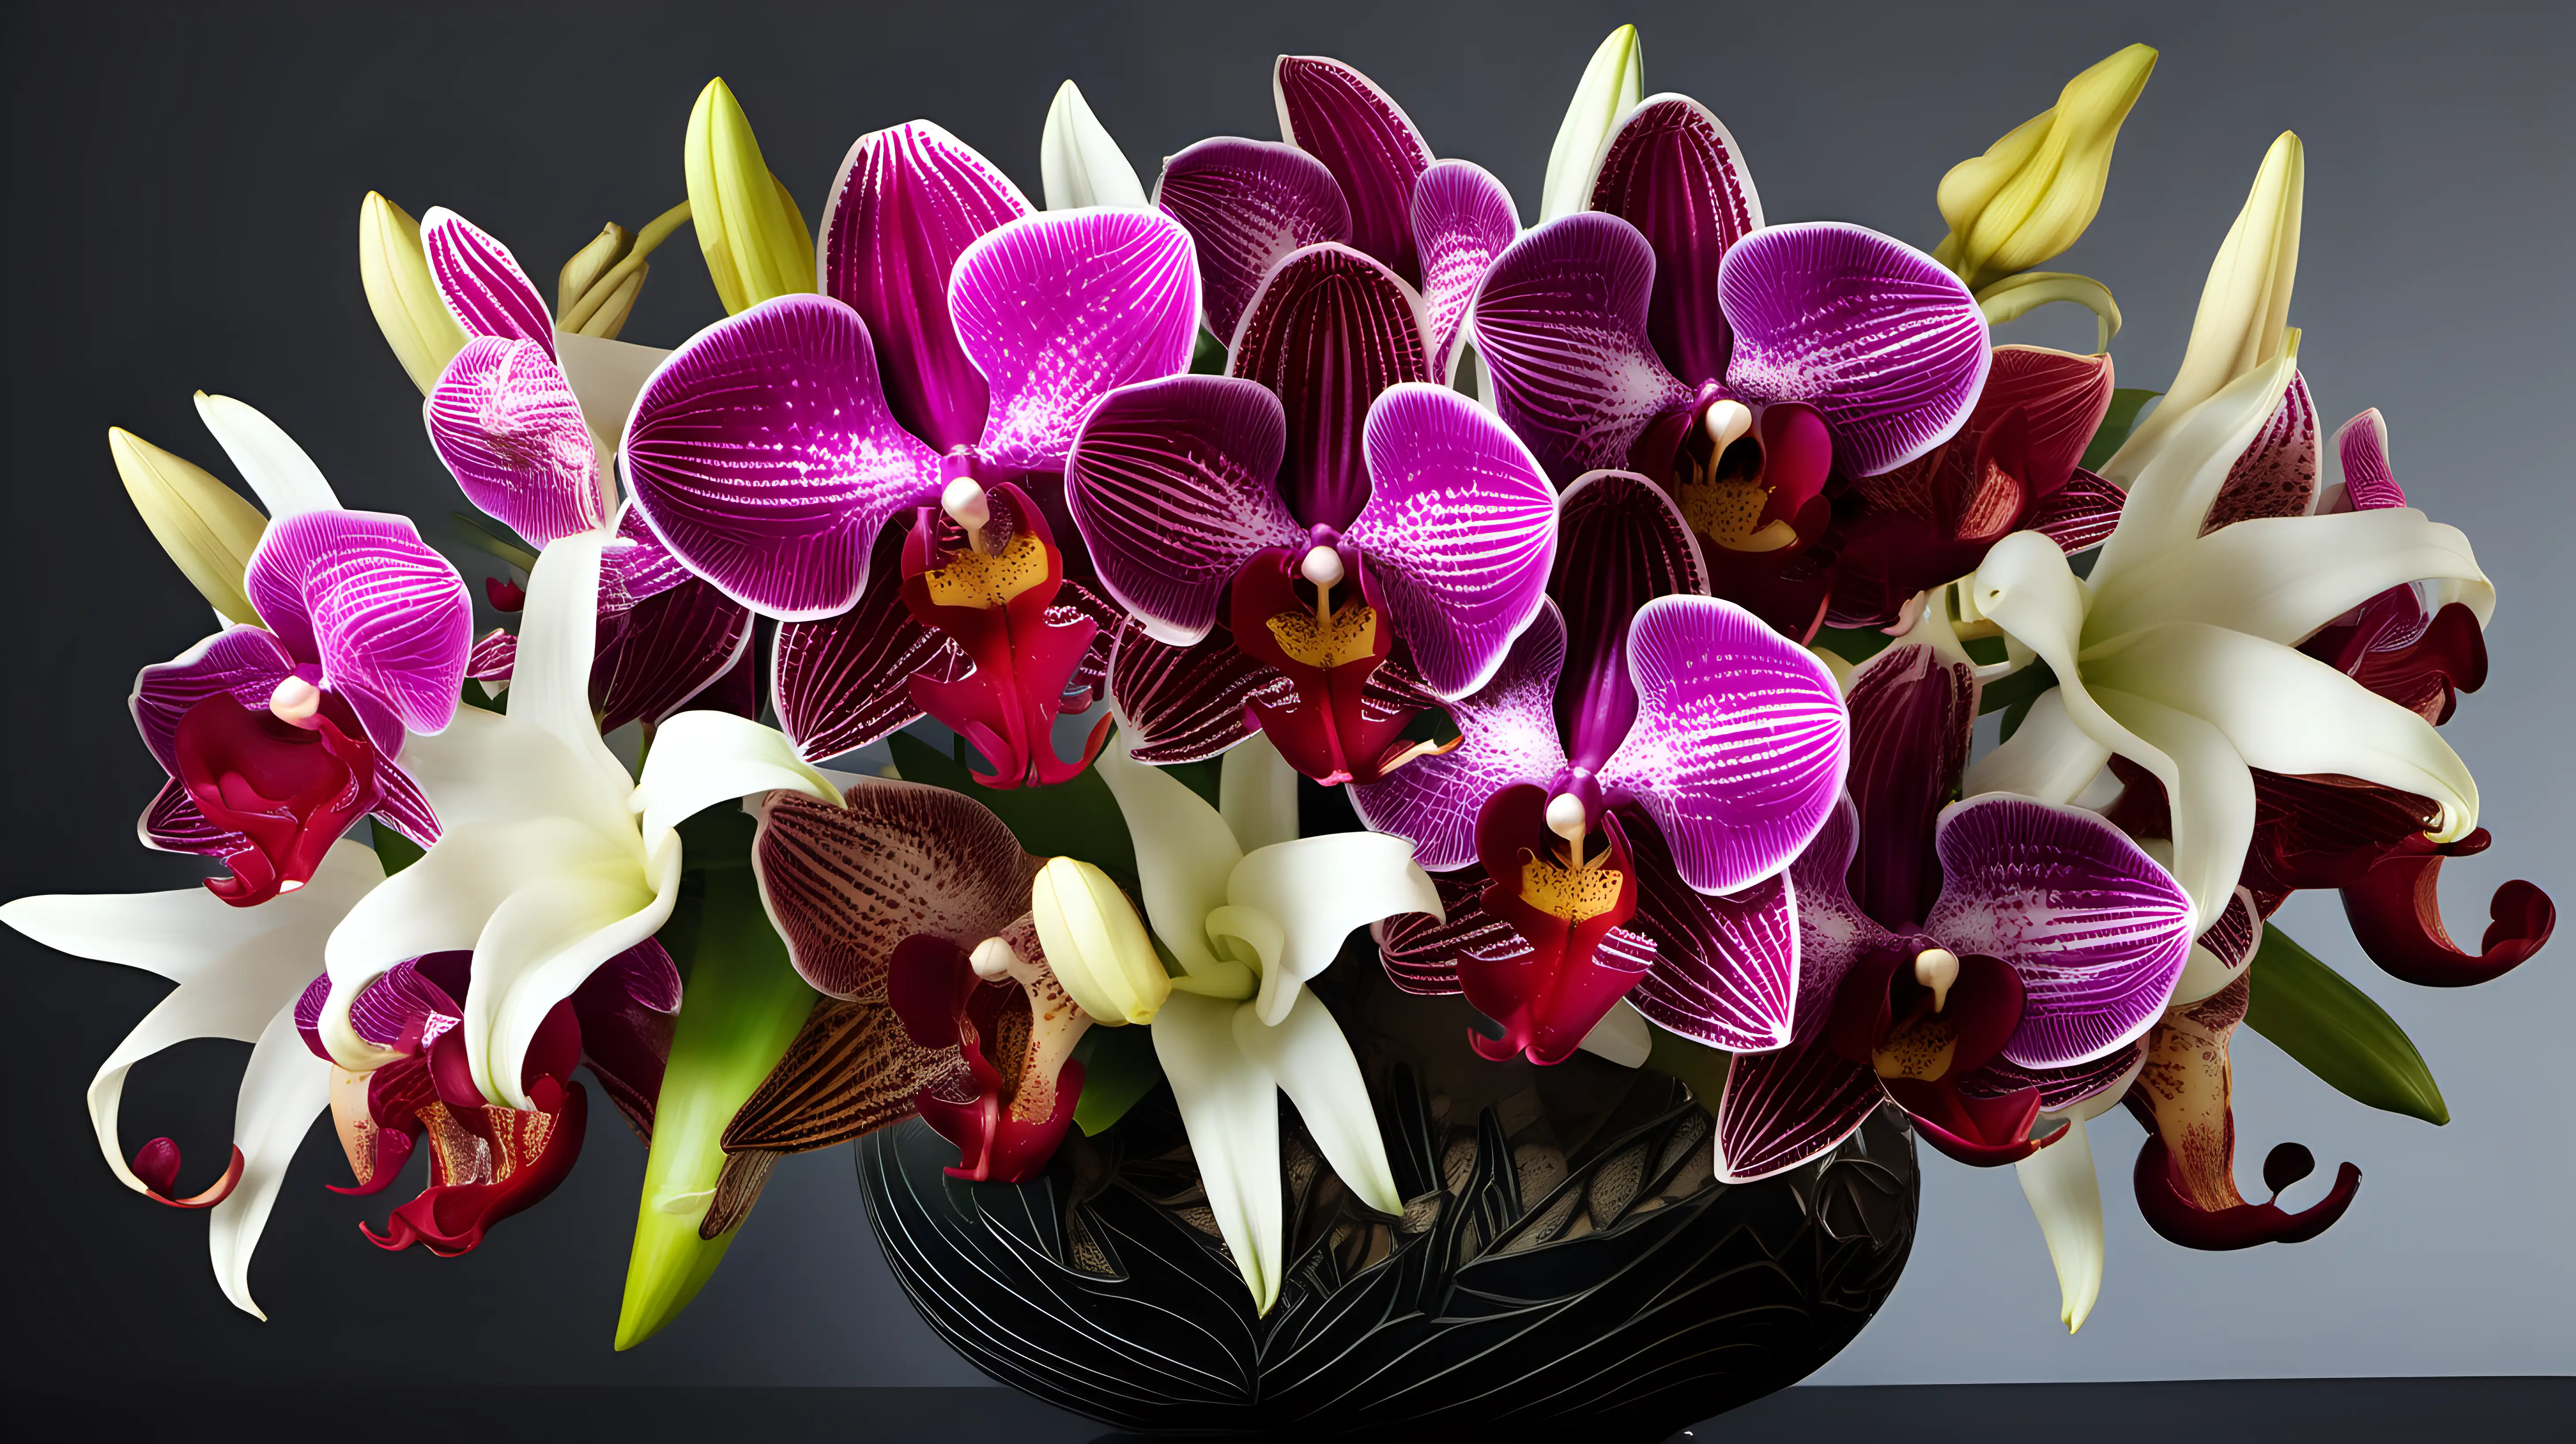 A bouquet of exotic orchids and lilies, with their intricate petals and vibrant colors, embodying passion and desire.